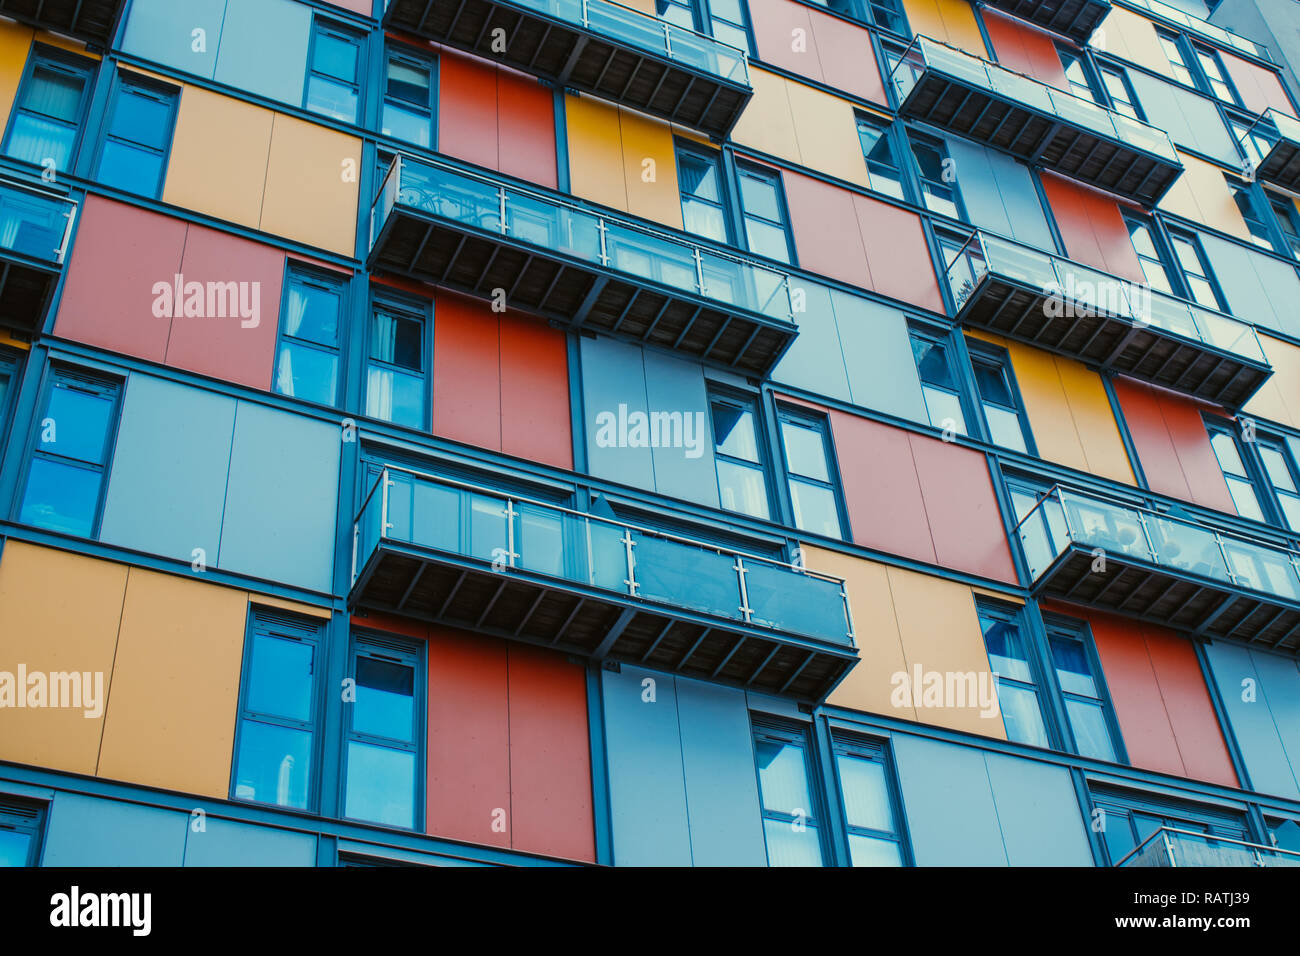 Brightly Coloured Flats with Balconies 